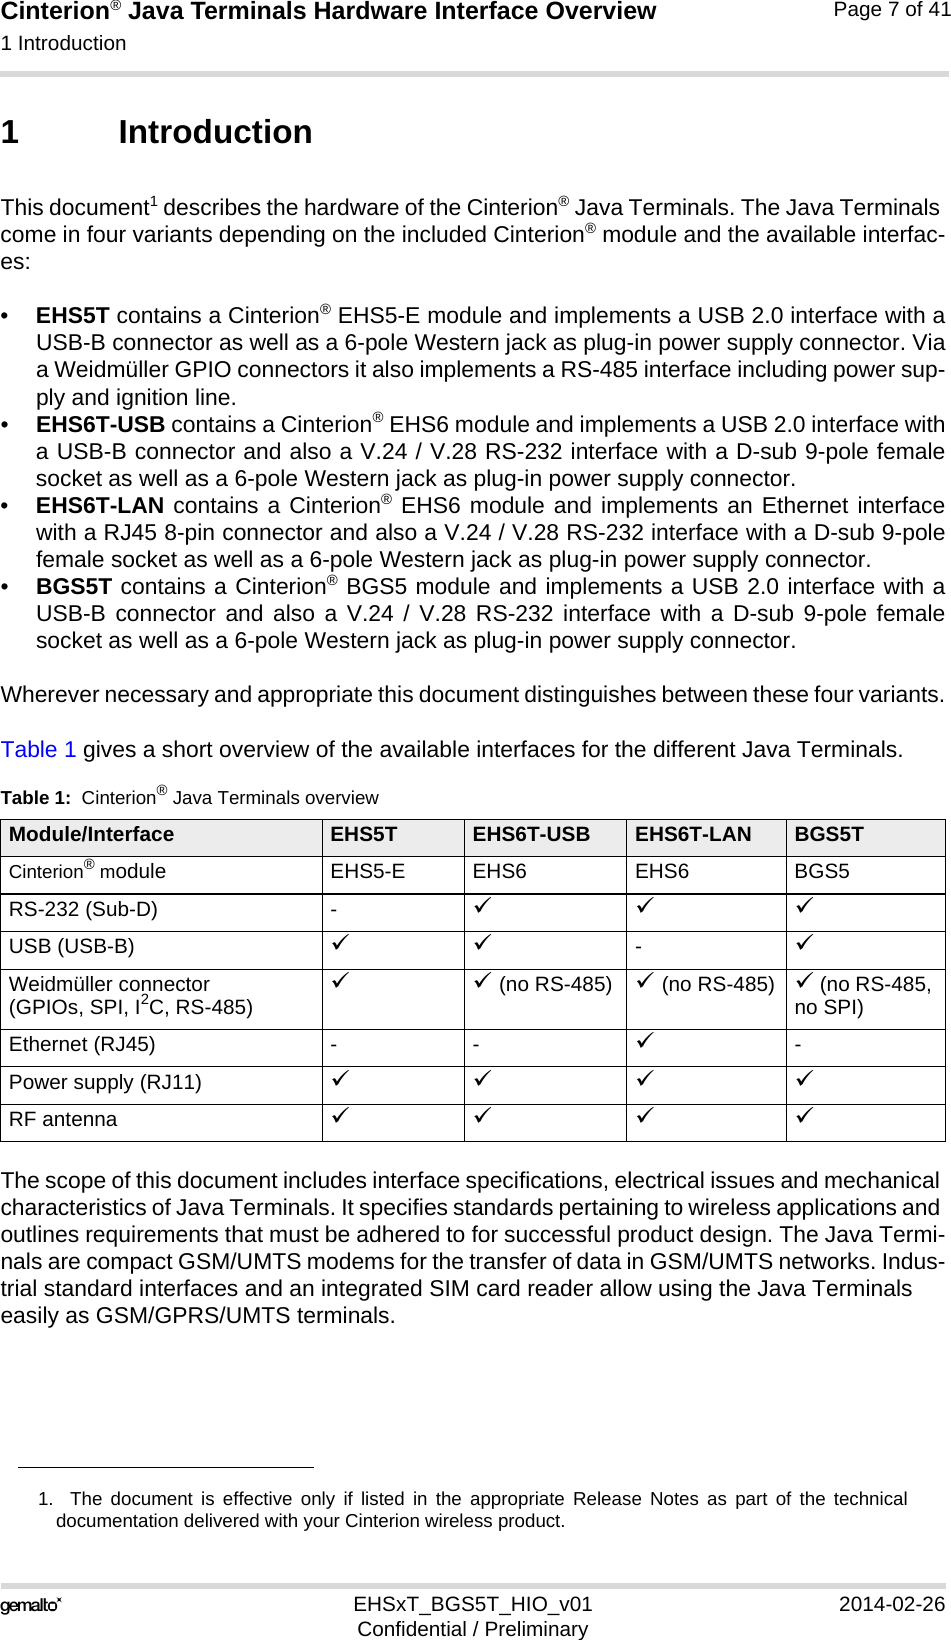 Cinterion® Java Terminals Hardware Interface Overview1 Introduction15EHSxT_BGS5T_HIO_v01 2014-02-26Confidential / PreliminaryPage 7 of 411 IntroductionThis document1 describes the hardware of the Cinterion® Java Terminals. The Java Terminals come in four variants depending on the included Cinterion® module and the available interfac-es:•EHS5T contains a Cinterion® EHS5-E module and implements a USB 2.0 interface with aUSB-B connector as well as a 6-pole Western jack as plug-in power supply connector. Viaa Weidmüller GPIO connectors it also implements a RS-485 interface including power sup-ply and ignition line.•EHS6T-USB contains a Cinterion® EHS6 module and implements a USB 2.0 interface witha USB-B connector and also a V.24 / V.28 RS-232 interface with a D-sub 9-pole femalesocket as well as a 6-pole Western jack as plug-in power supply connector.•EHS6T-LAN contains a Cinterion® EHS6 module and implements an Ethernet interfacewith a RJ45 8-pin connector and also a V.24 / V.28 RS-232 interface with a D-sub 9-polefemale socket as well as a 6-pole Western jack as plug-in power supply connector.•BGS5T contains a Cinterion® BGS5 module and implements a USB 2.0 interface with aUSB-B connector and also a V.24 / V.28 RS-232 interface with a D-sub 9-pole femalesocket as well as a 6-pole Western jack as plug-in power supply connector. Wherever necessary and appropriate this document distinguishes between these four variants.Table 1 gives a short overview of the available interfaces for the different Java Terminals.The scope of this document includes interface specifications, electrical issues and mechanical characteristics of Java Terminals. It specifies standards pertaining to wireless applications and outlines requirements that must be adhered to for successful product design. The Java Termi-nals are compact GSM/UMTS modems for the transfer of data in GSM/UMTS networks. Indus-trial standard interfaces and an integrated SIM card reader allow using the Java Terminals easily as GSM/GPRS/UMTS terminals. 1.  The document is effective only if listed in the appropriate Release Notes as part of the technicaldocumentation delivered with your Cinterion wireless product.Table 1:  Cinterion® Java Terminals overviewModule/Interface EHS5T EHS6T-USB EHS6T-LAN BGS5TCinterion® module EHS5-E EHS6 EHS6 BGS5RS-232 (Sub-D) - USB (USB-B)  -Weidmüller connector (GPIOs, SPI, I2C, RS-485) (no RS-485)  (no RS-485)  (no RS-485, no SPI)Ethernet (RJ45) - - -Power supply (RJ11)   RF antenna   